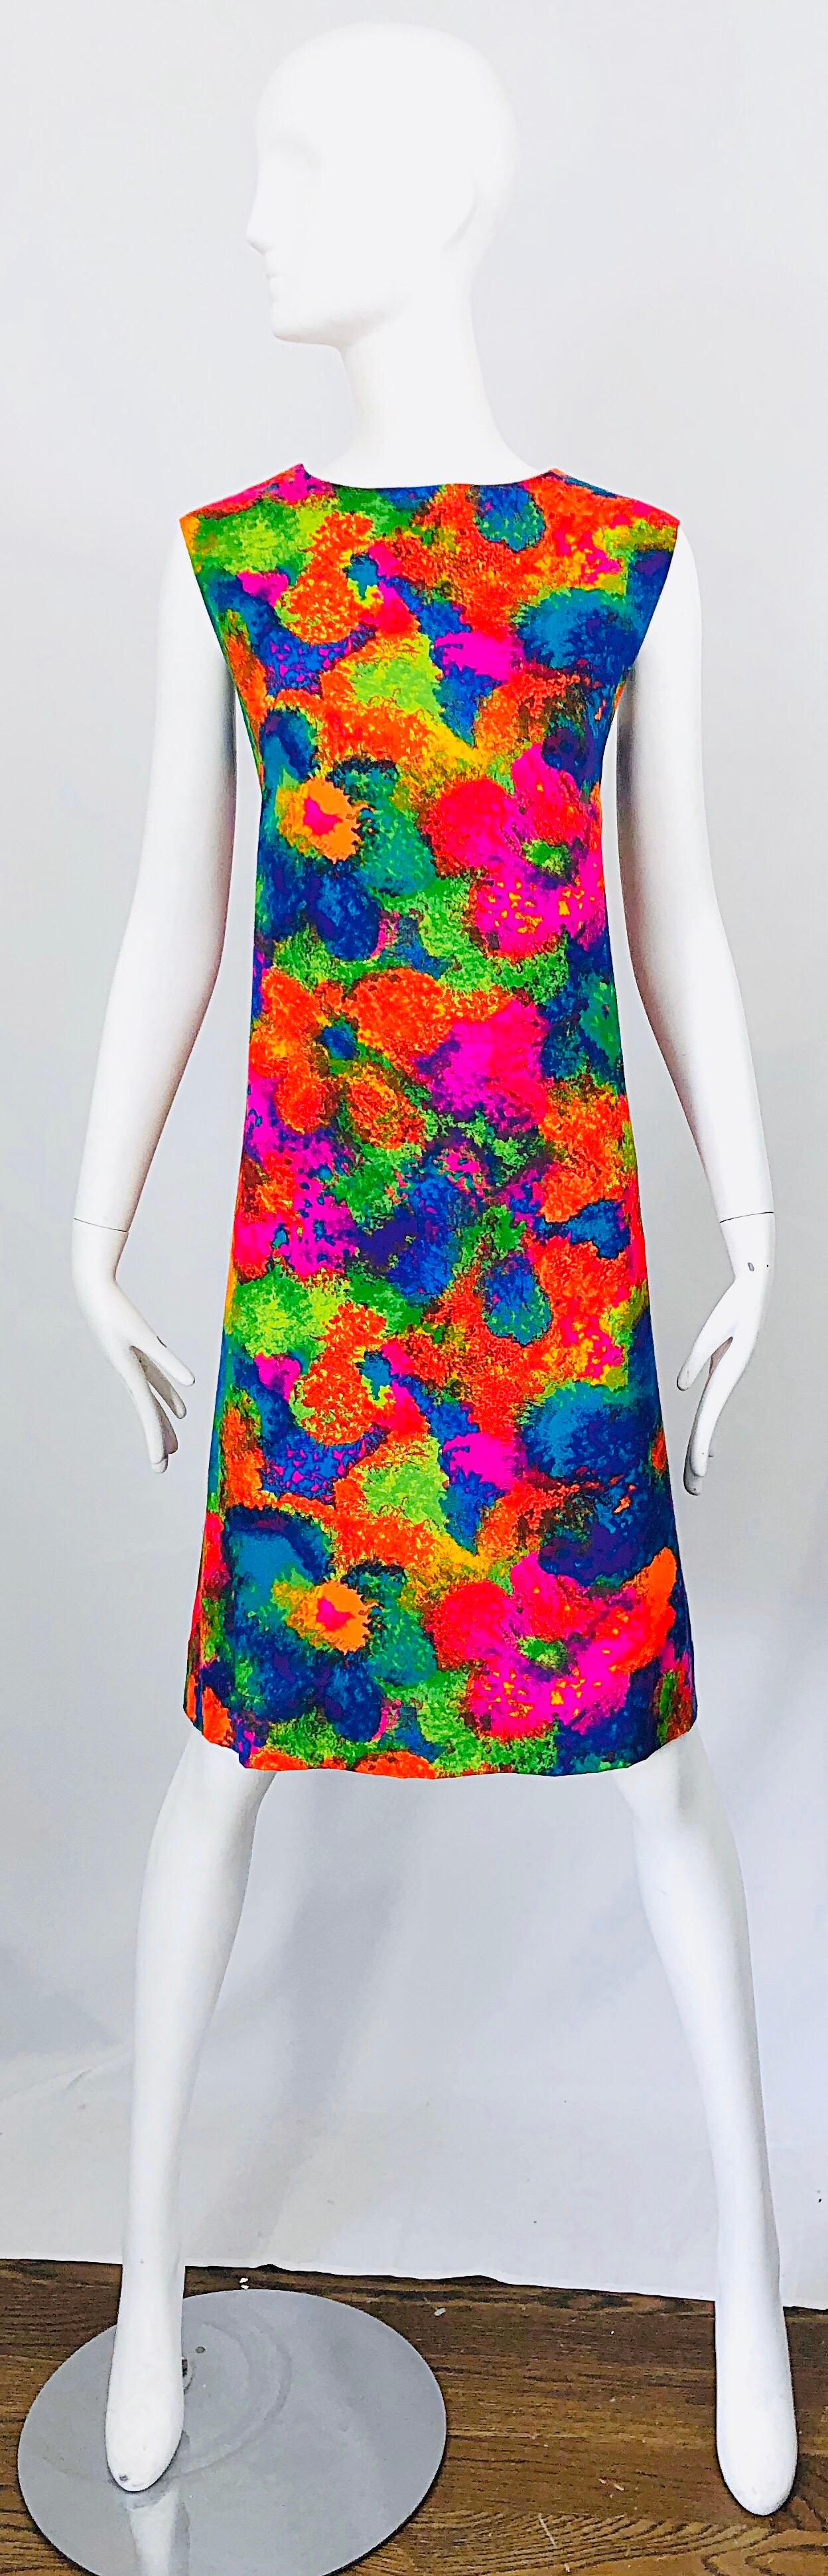 Chic 1960s Larger Size Neon Abstract Flower Print Vintage 60s Cotton Shift Dress For Sale 5